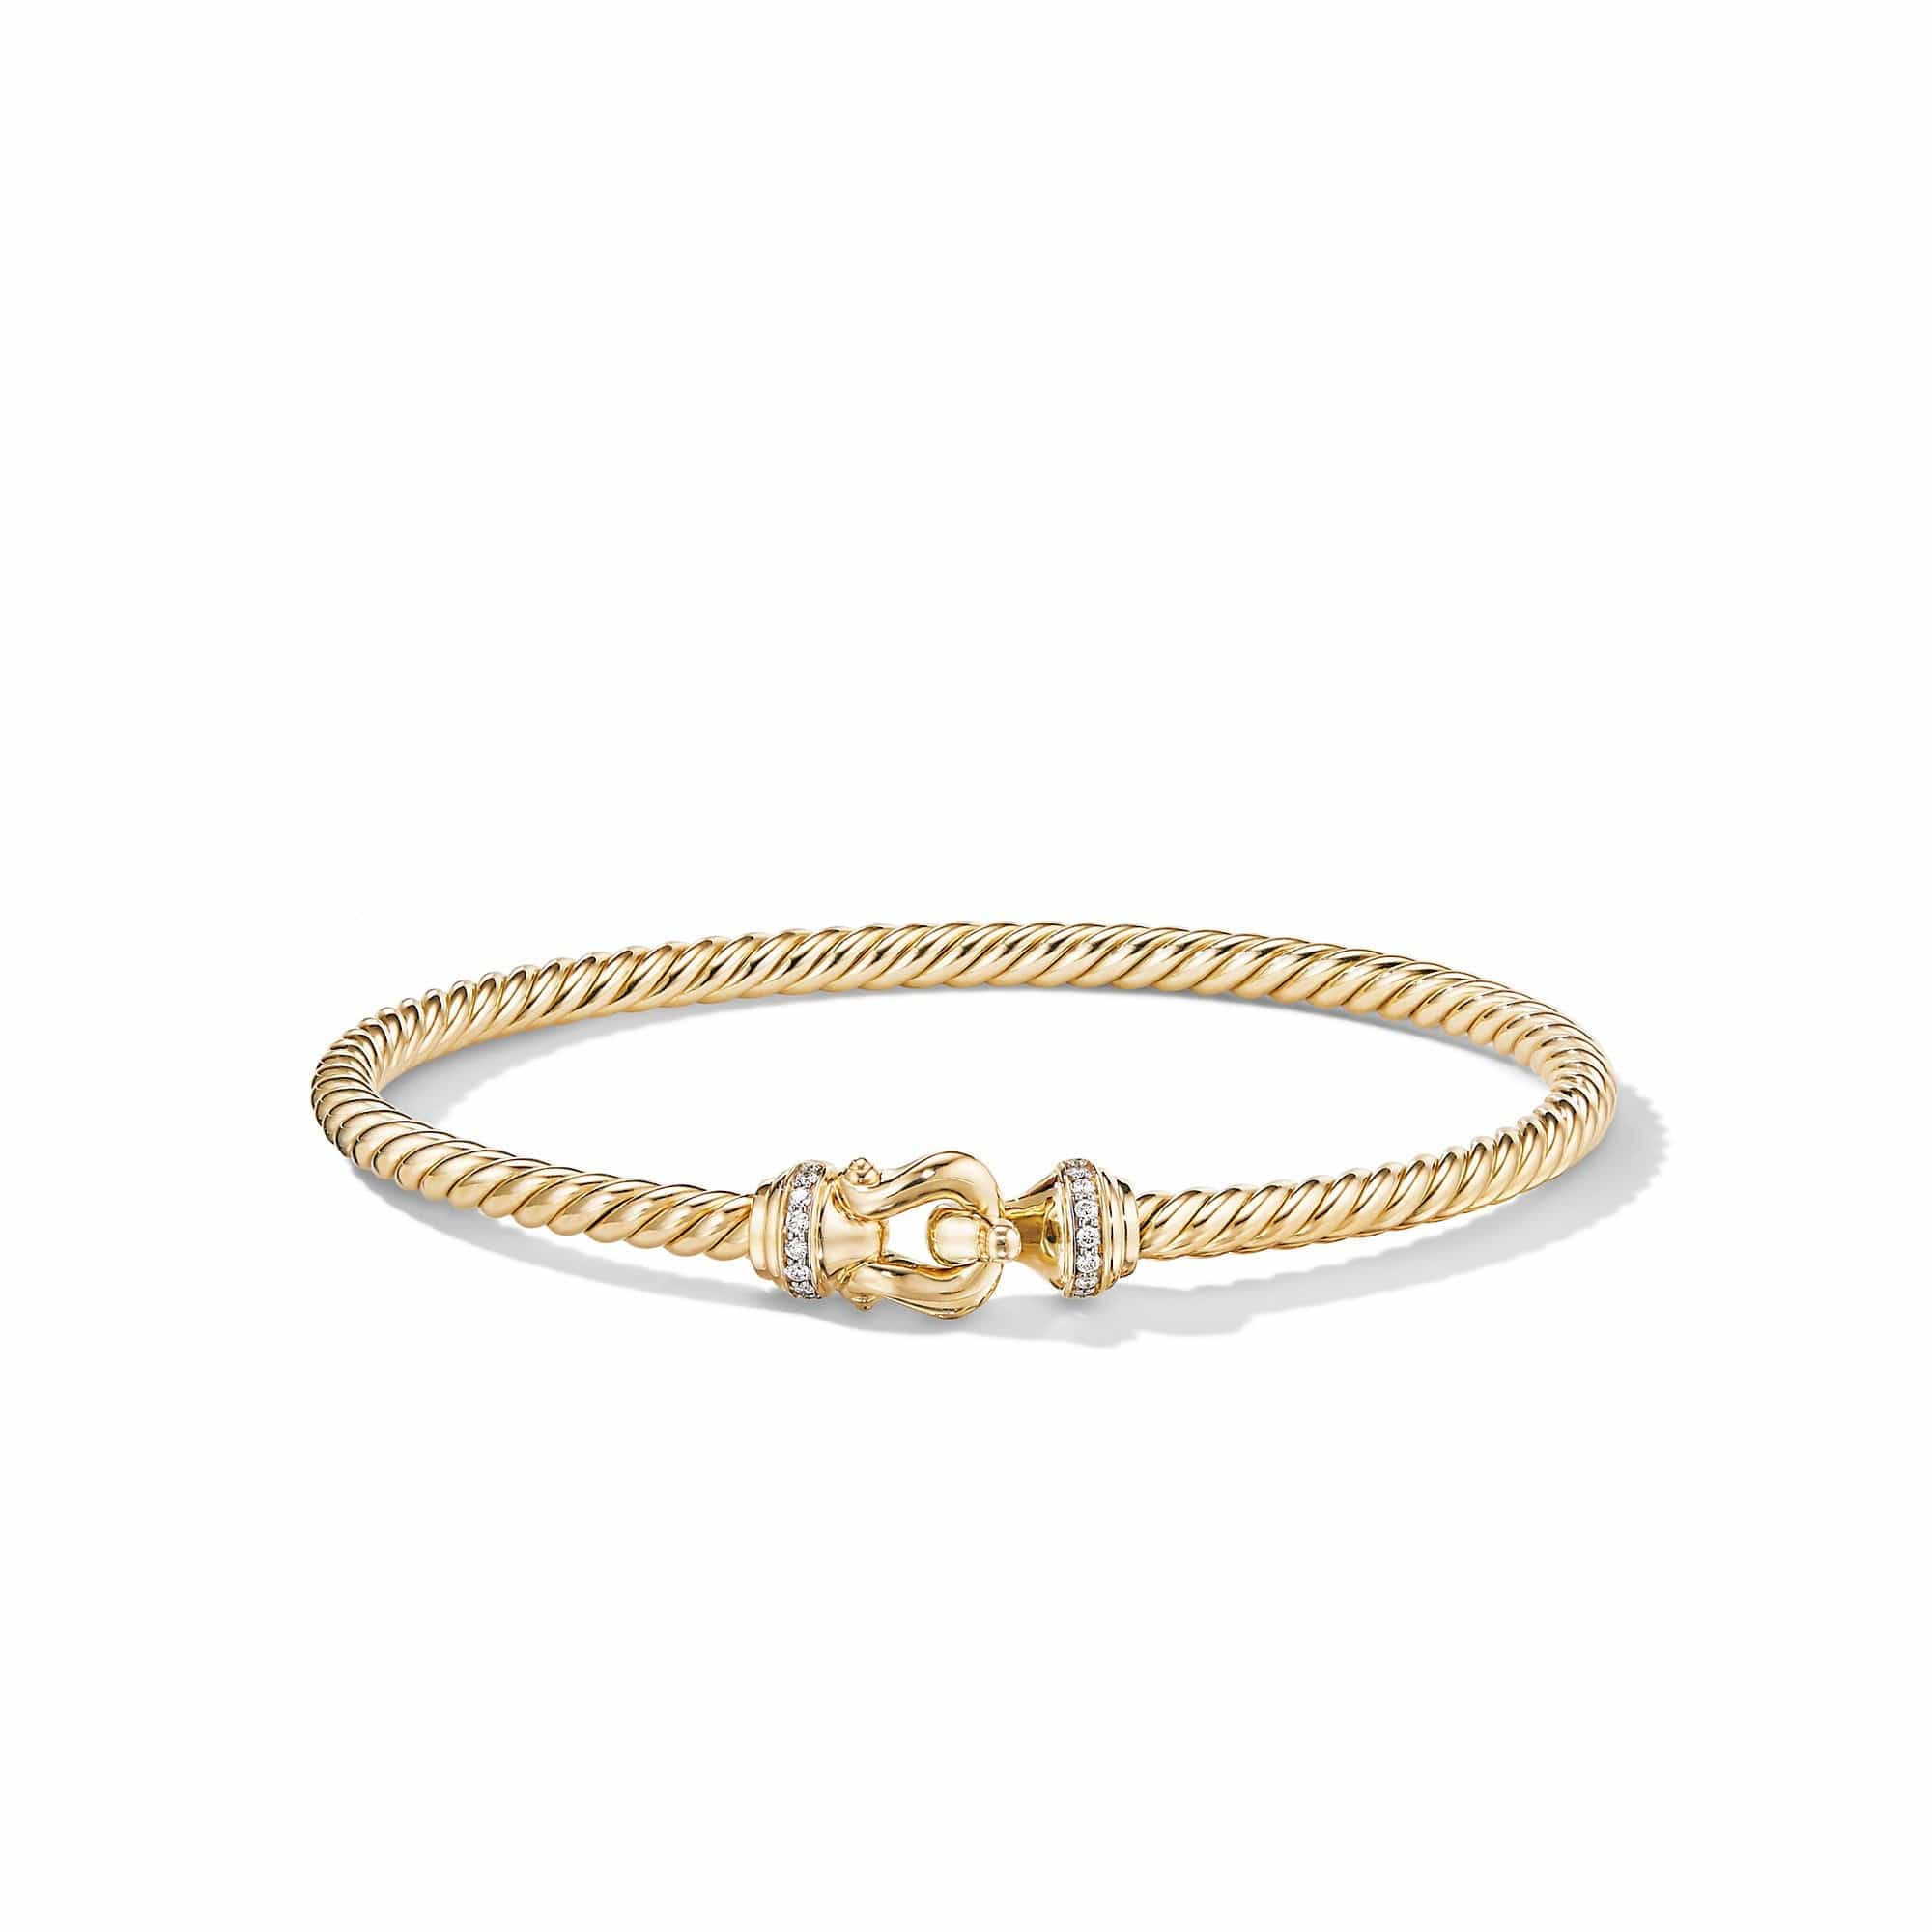 Buckle Bracelet in 18K Yellow Gold with Diamonds, Long's Jewelers